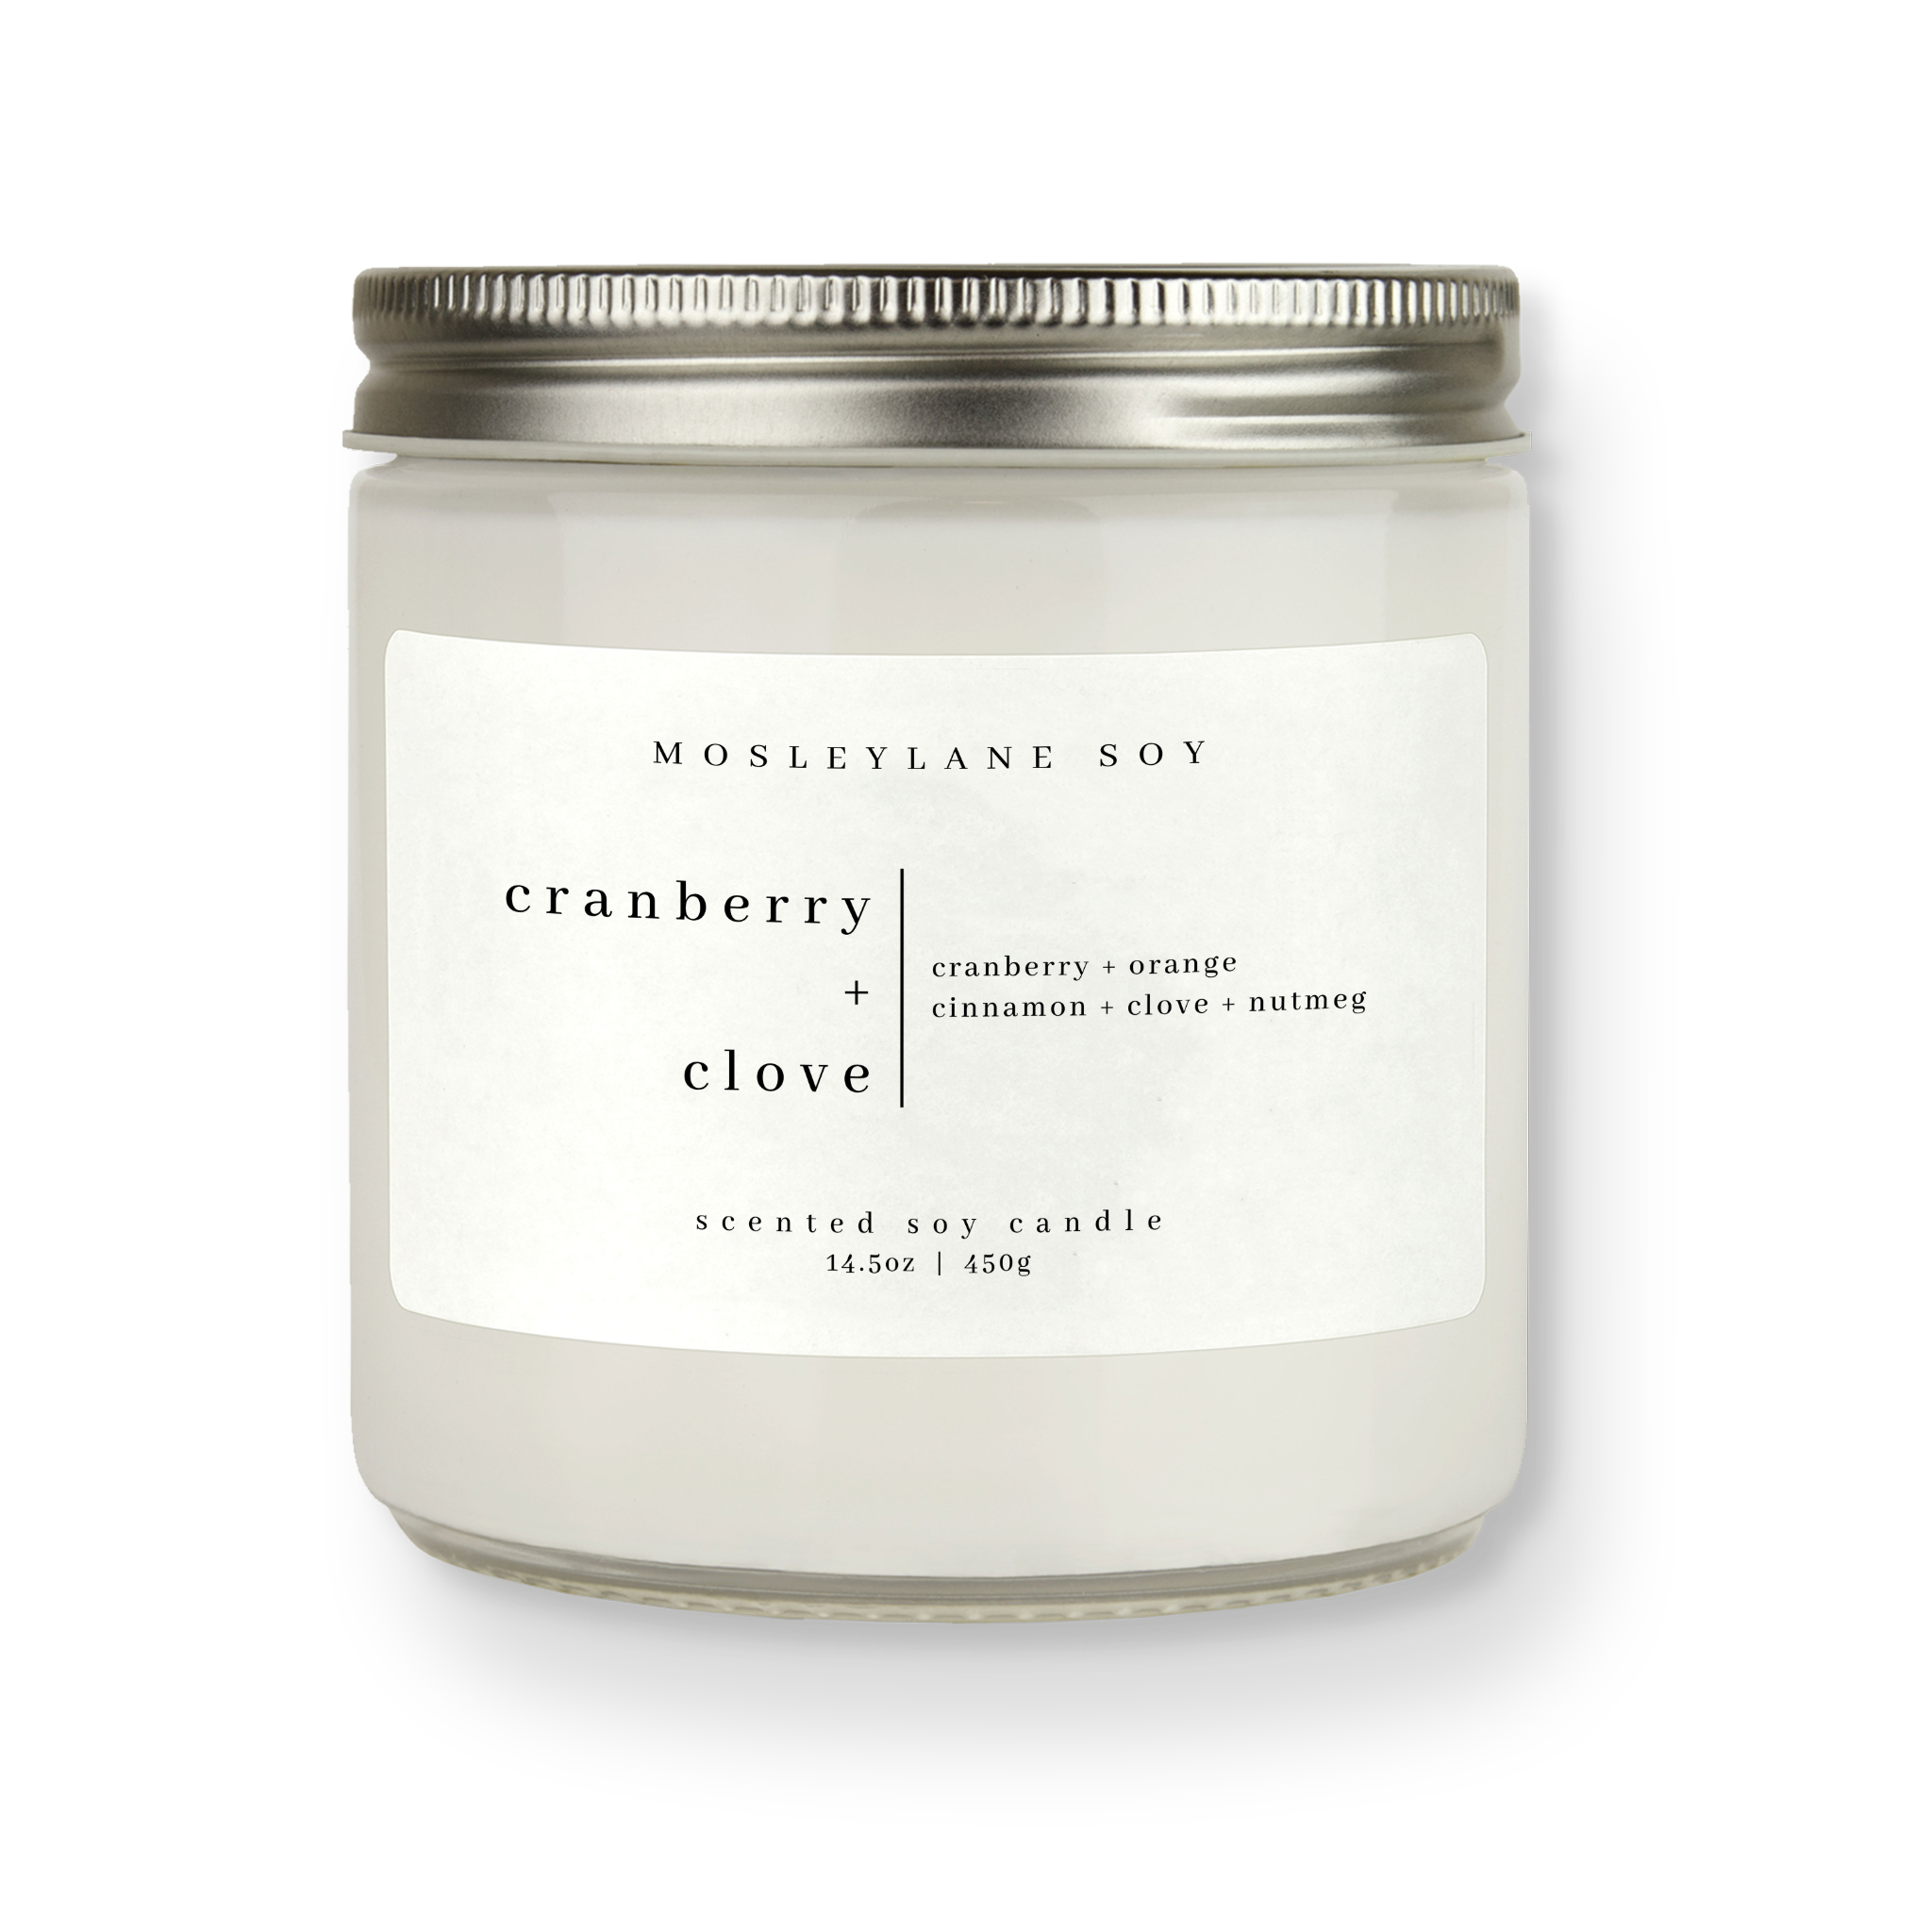 Cranberry + Clove Studio Soy Candle